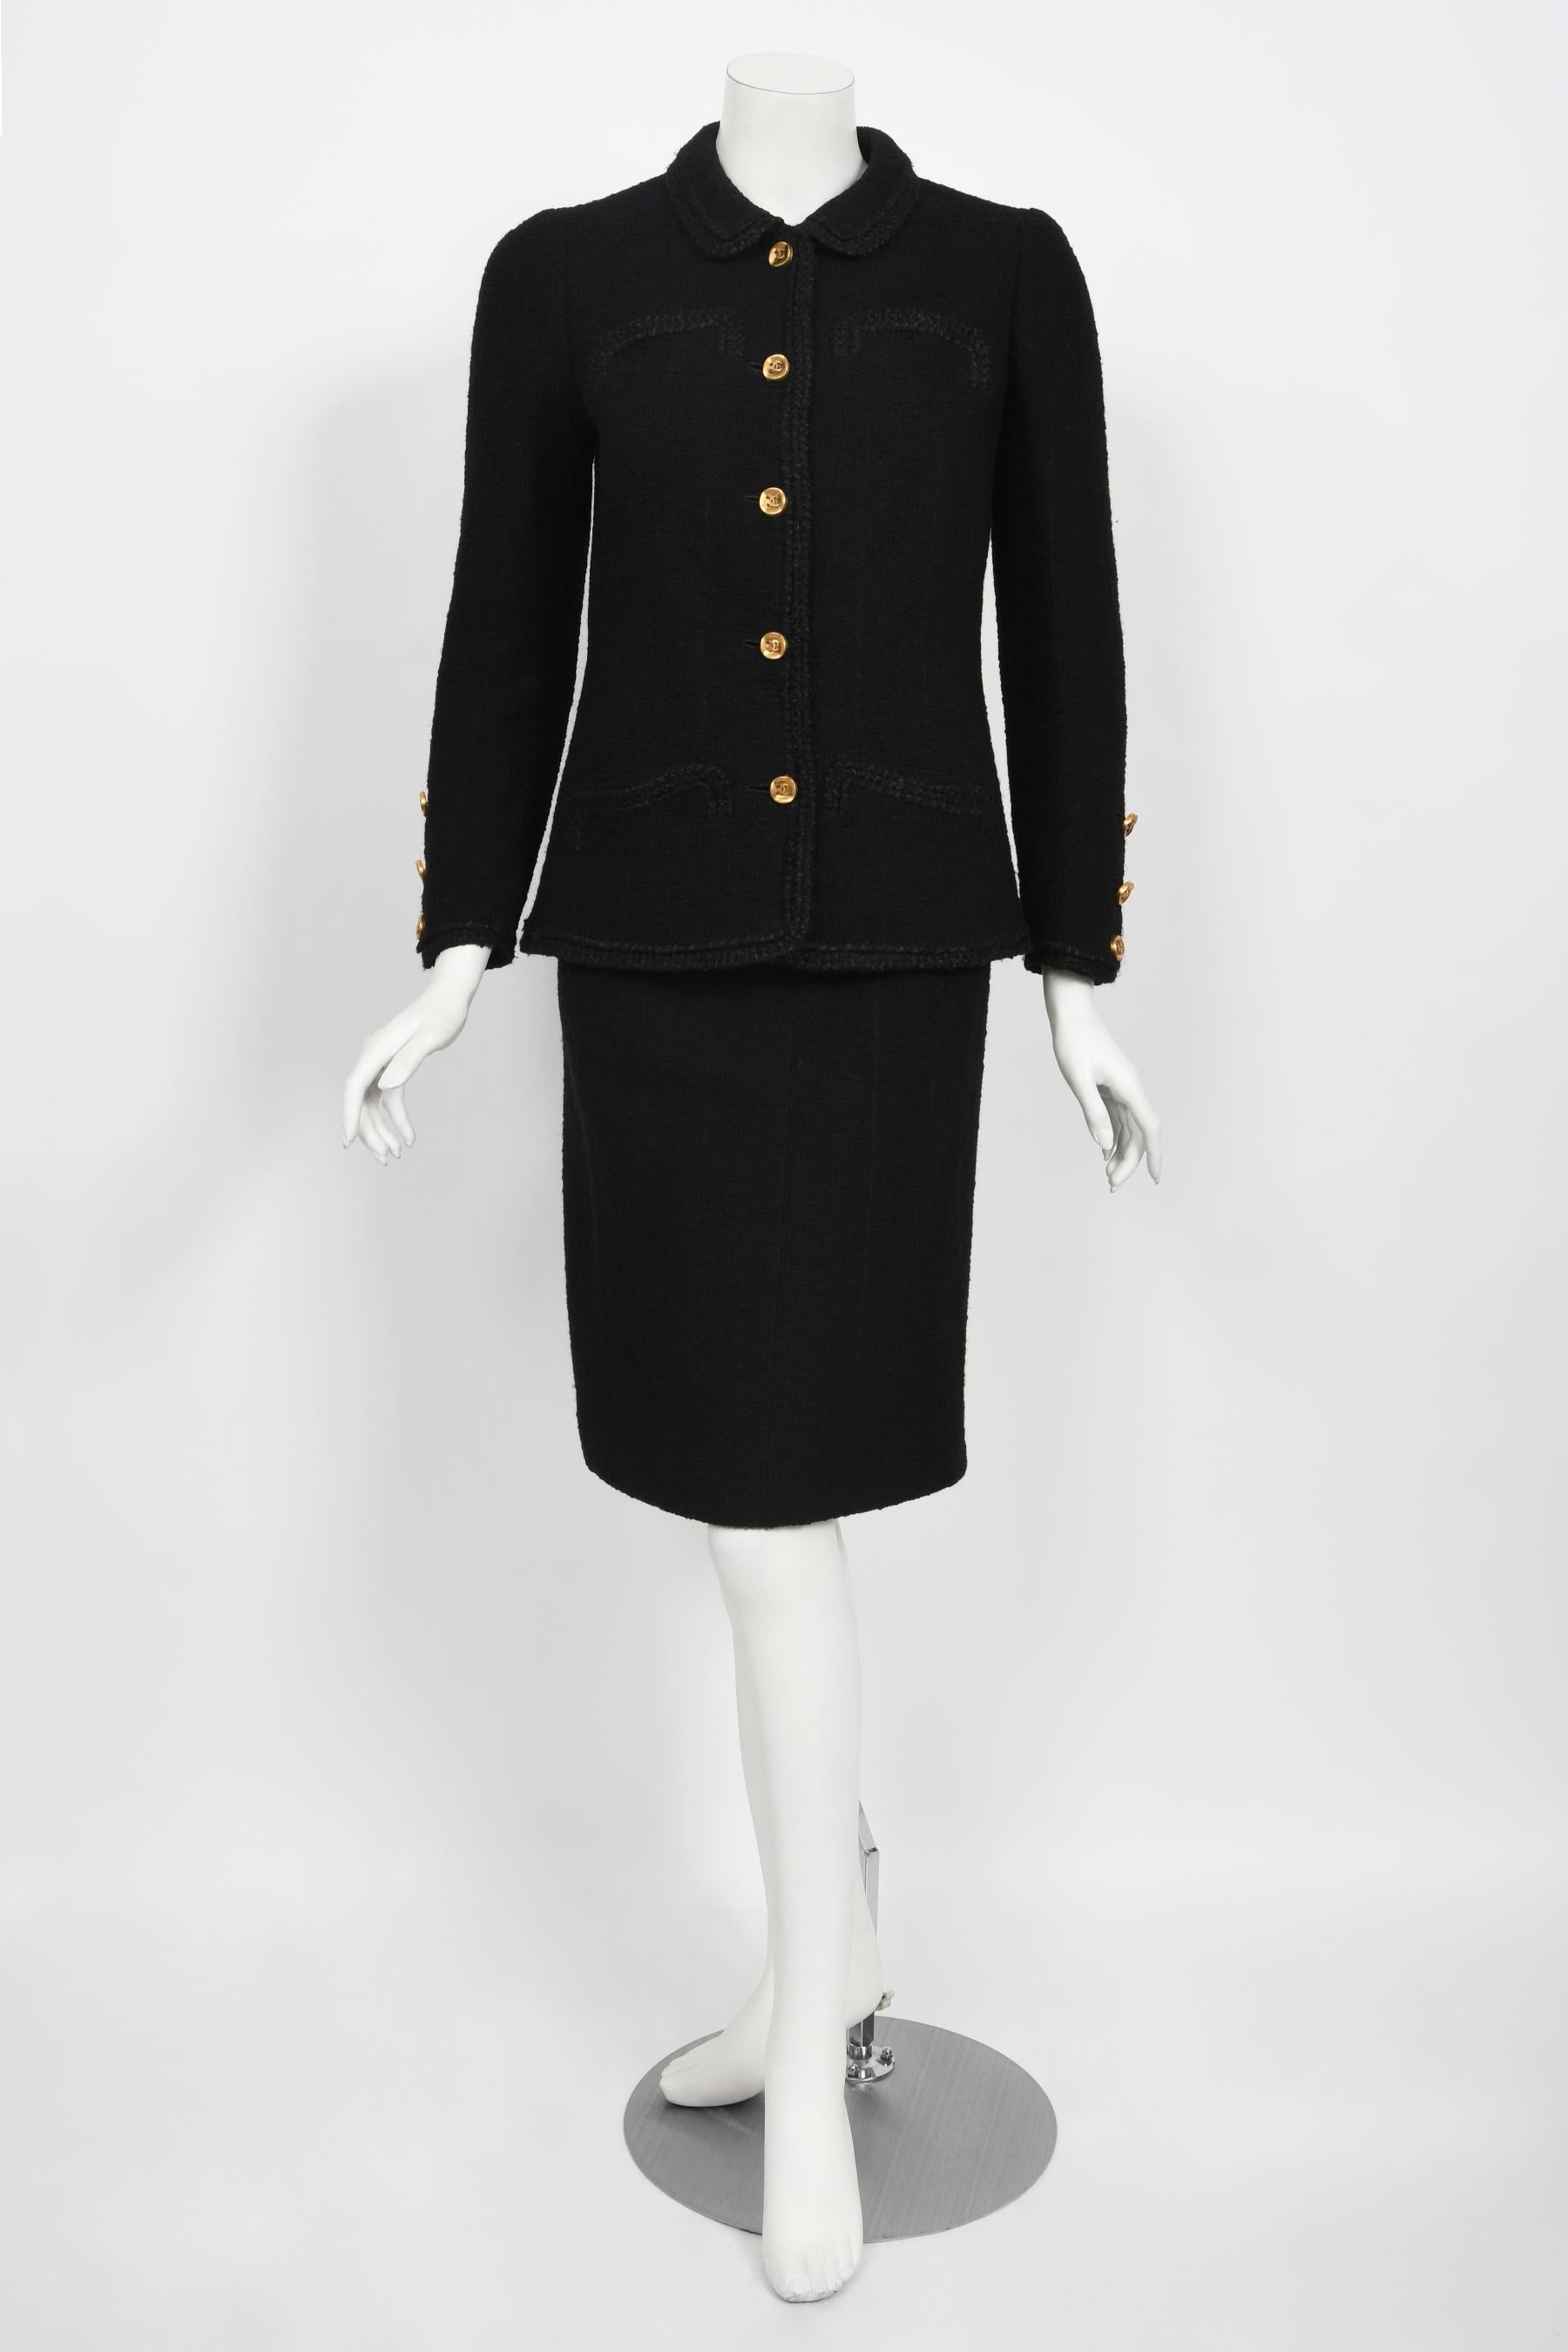 Chanel is known to be one of the most luxurious and decadent fashion houses in the world. This highly coveted and instantly recognizable haute couture custom commissioned Chanel boucle wool two piece suit from fall-winter 1973 is a perfect example